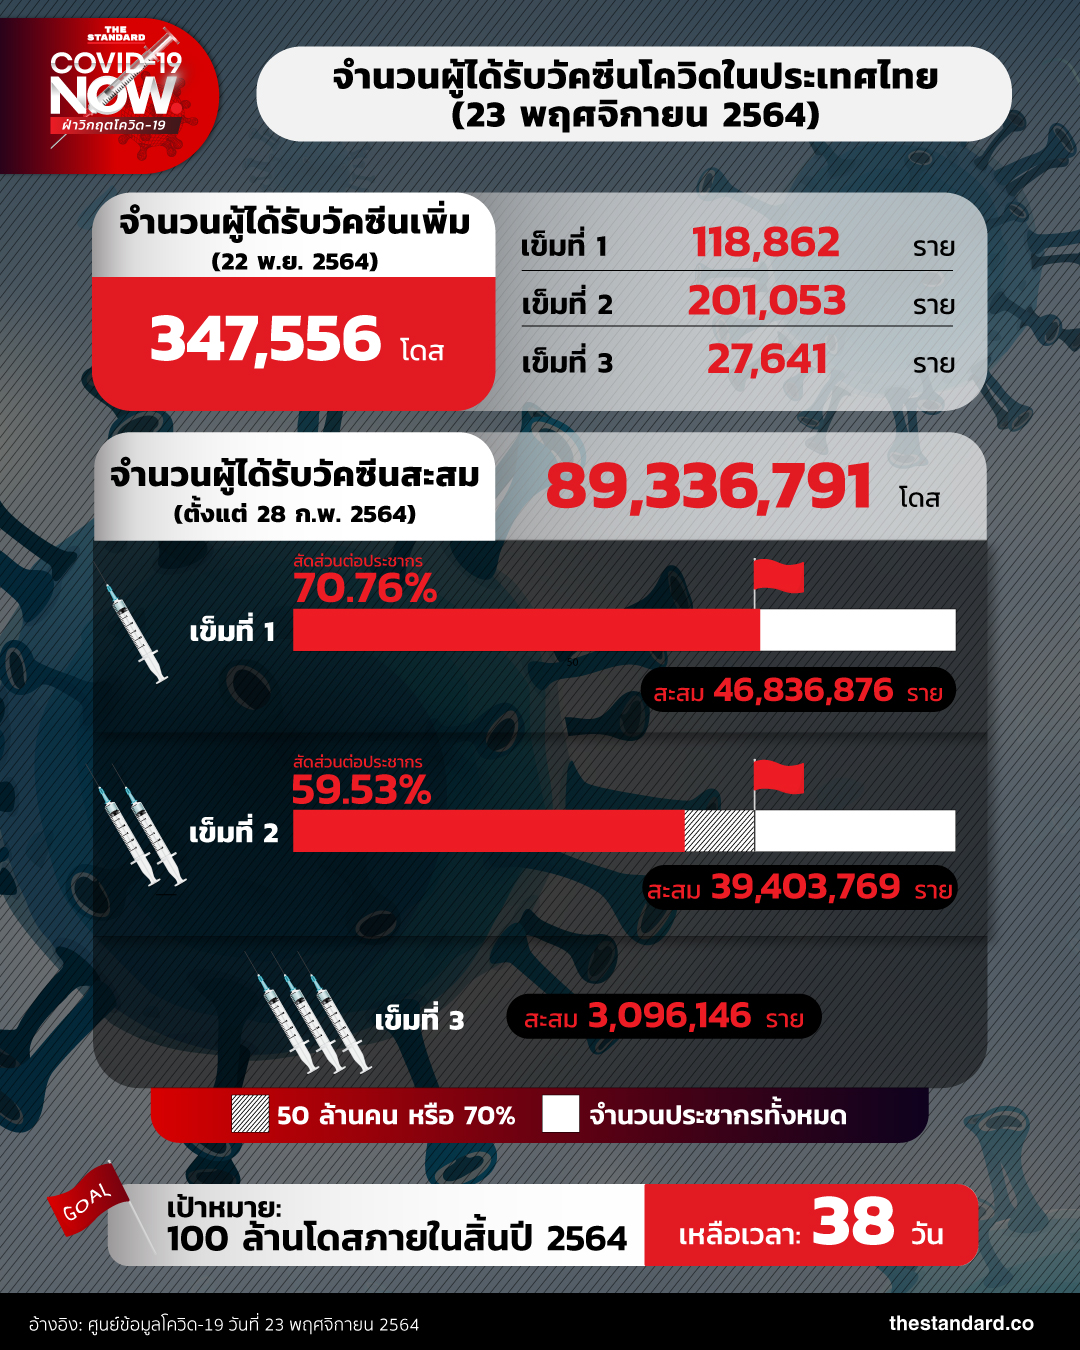 number-of-people-got-covid-19-vaccines-in-thailand-231164